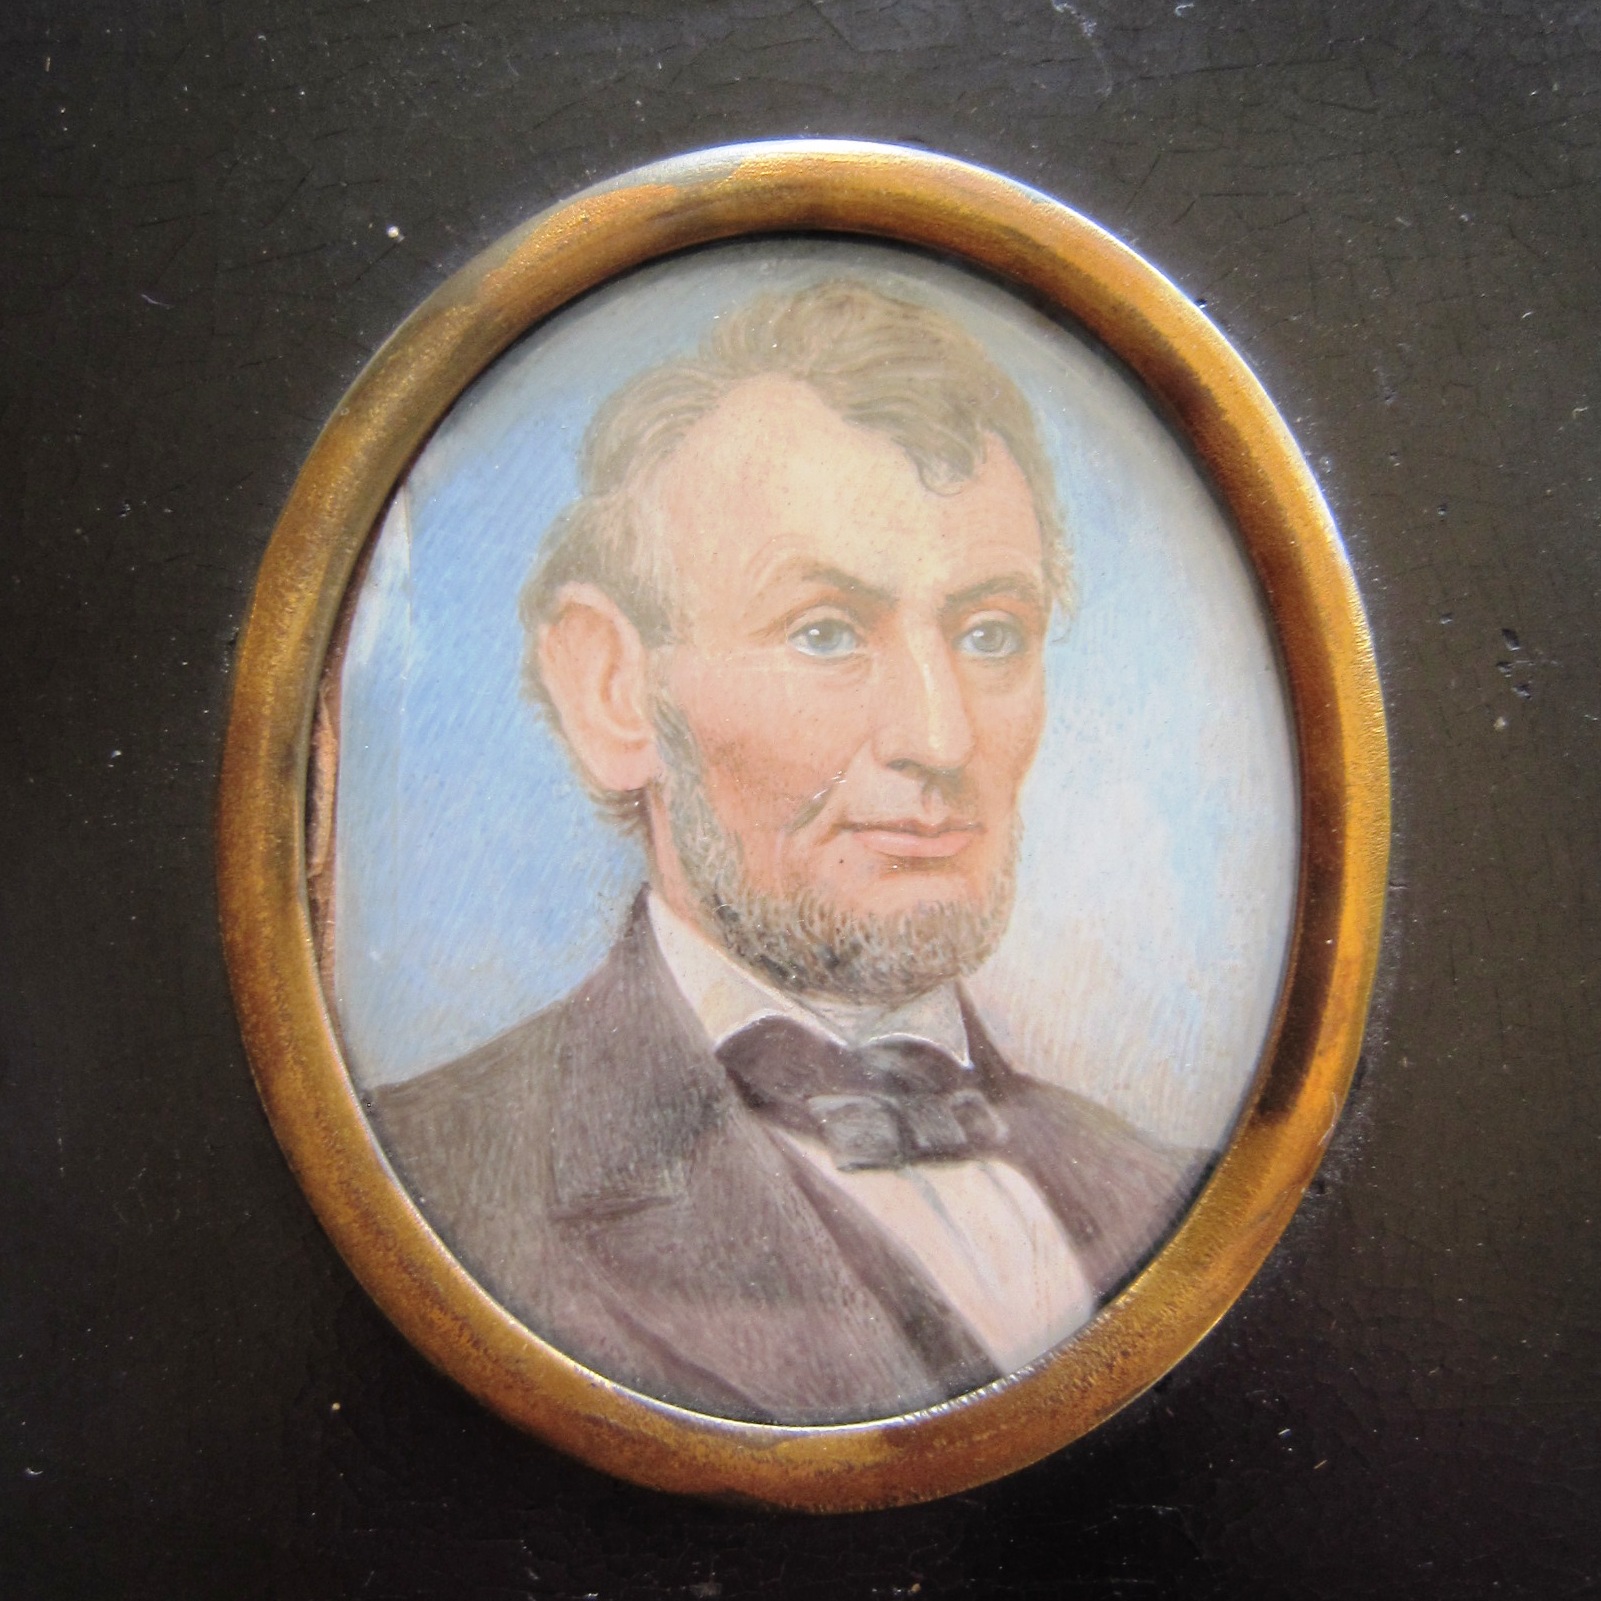 Abraham Lincoln portrait painted on ivory - Circa 1870s